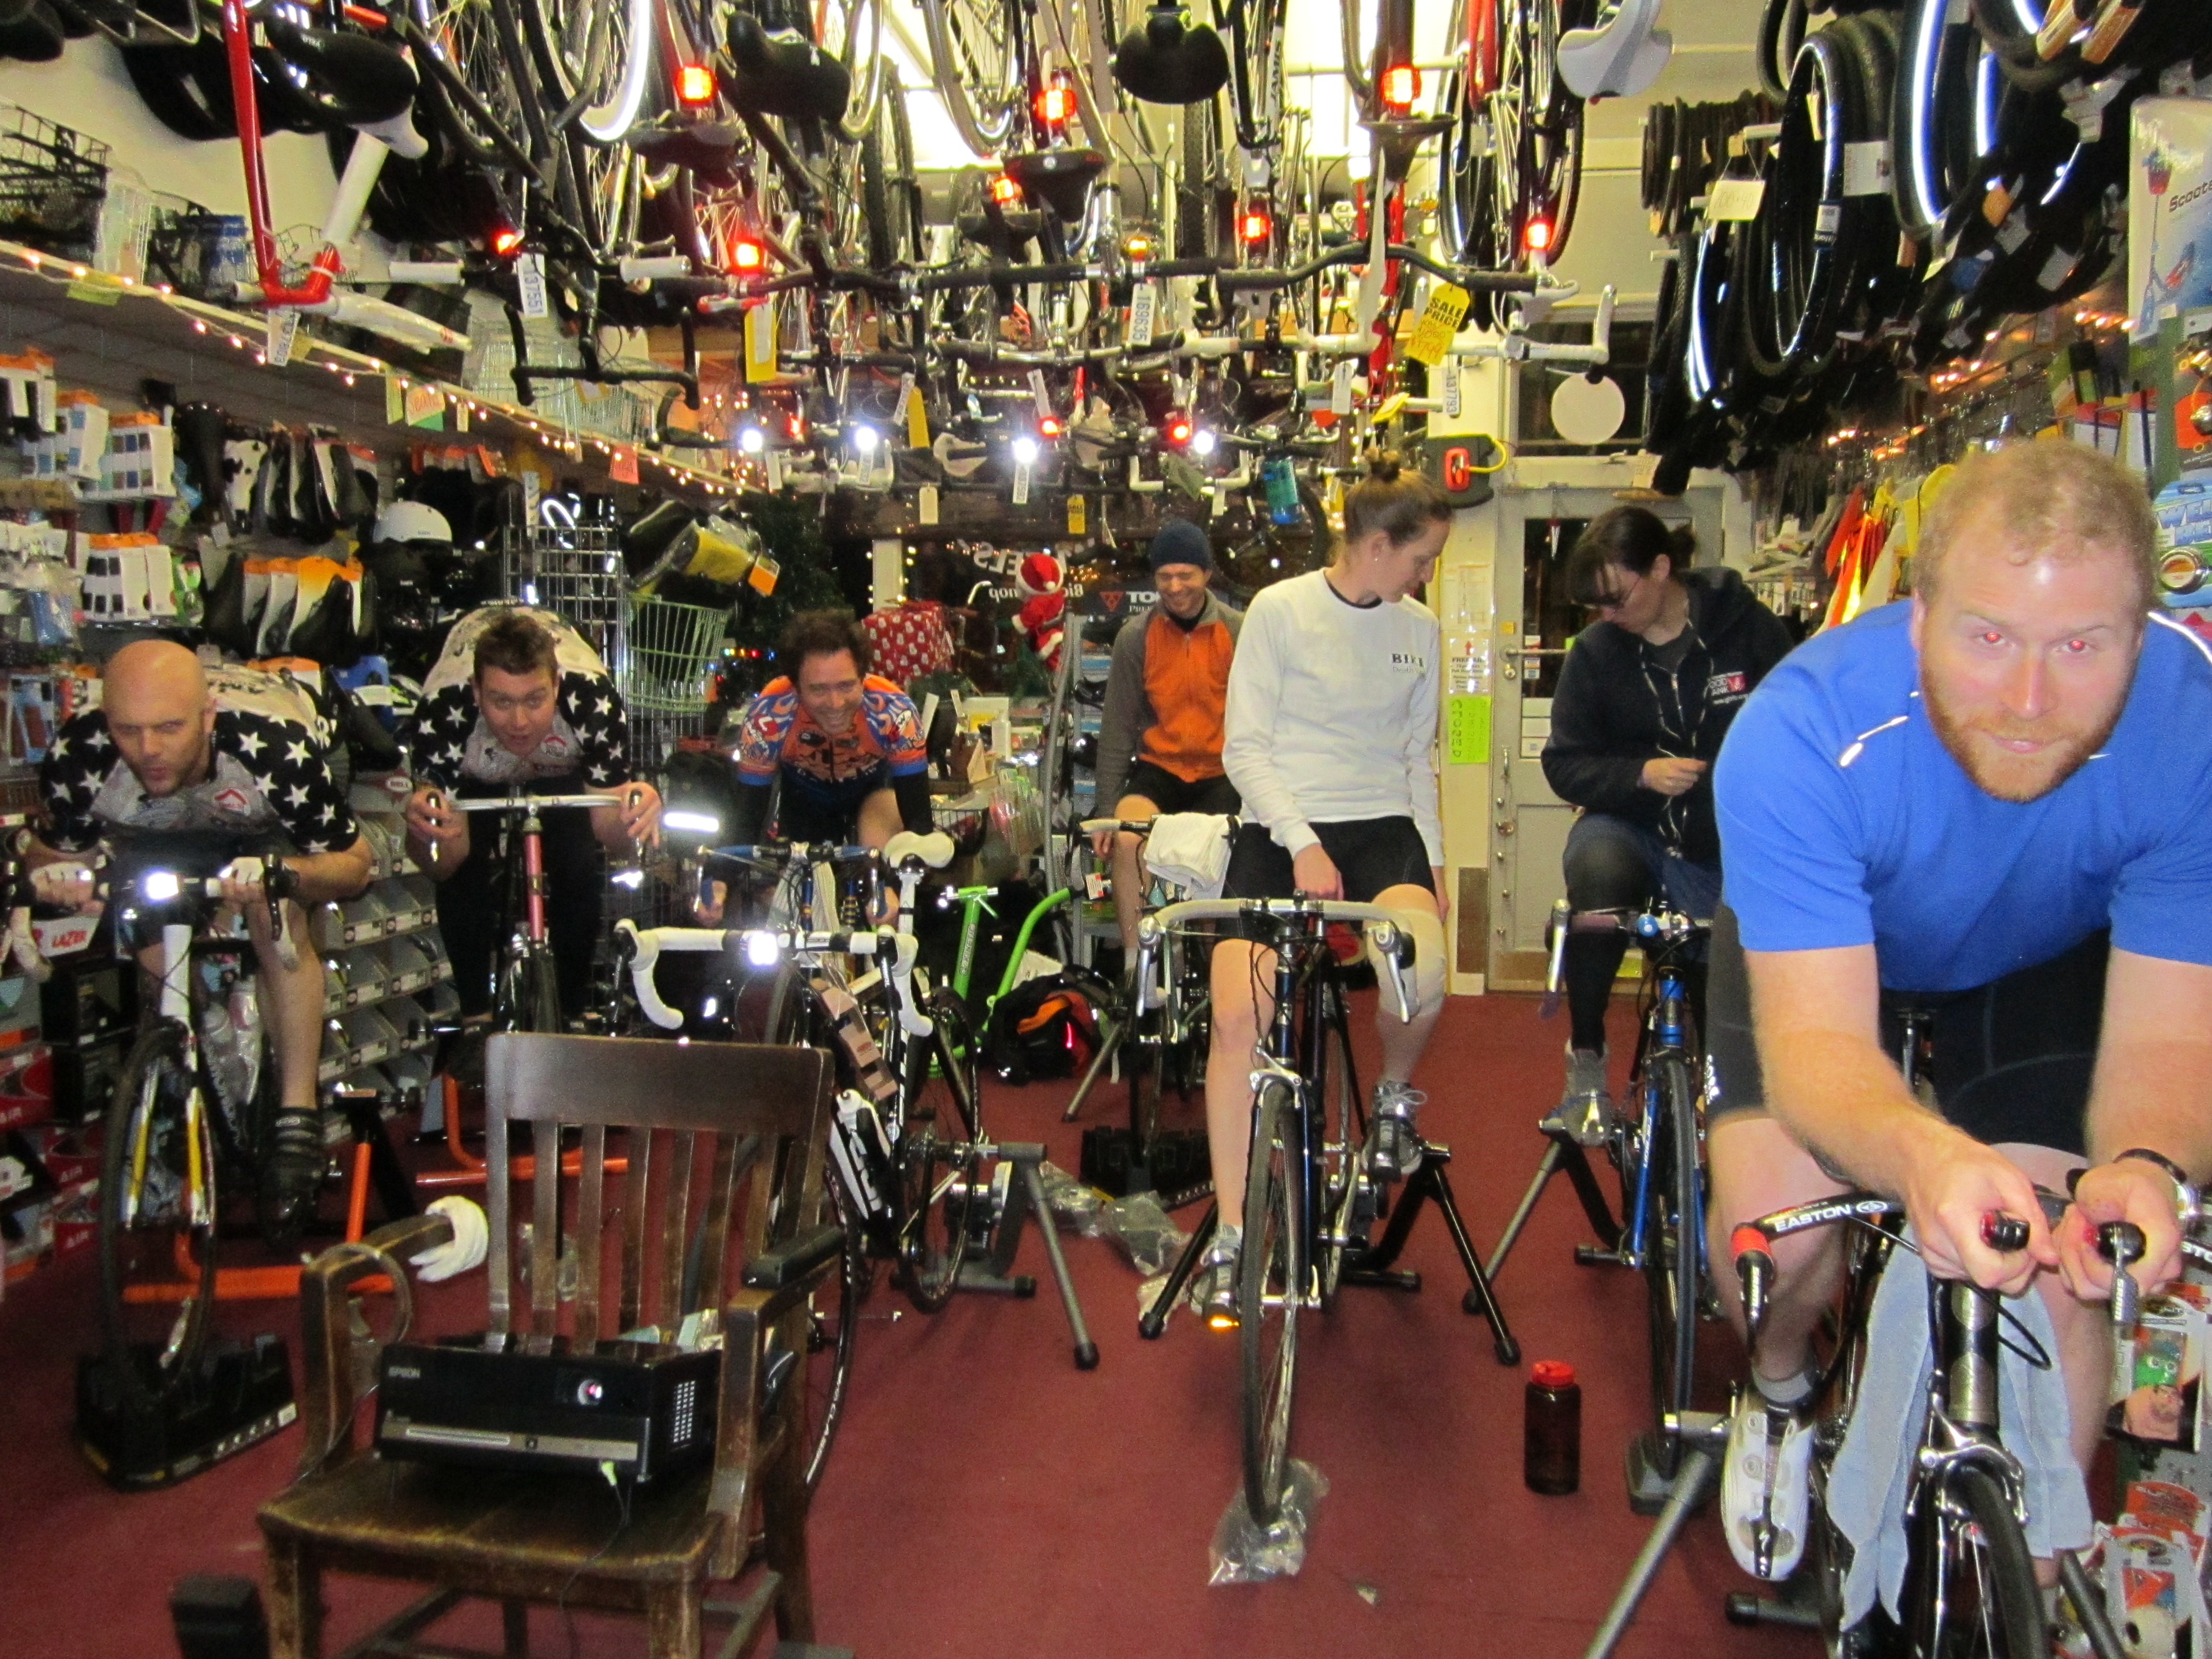 [cyclists on trainers inside the shop]